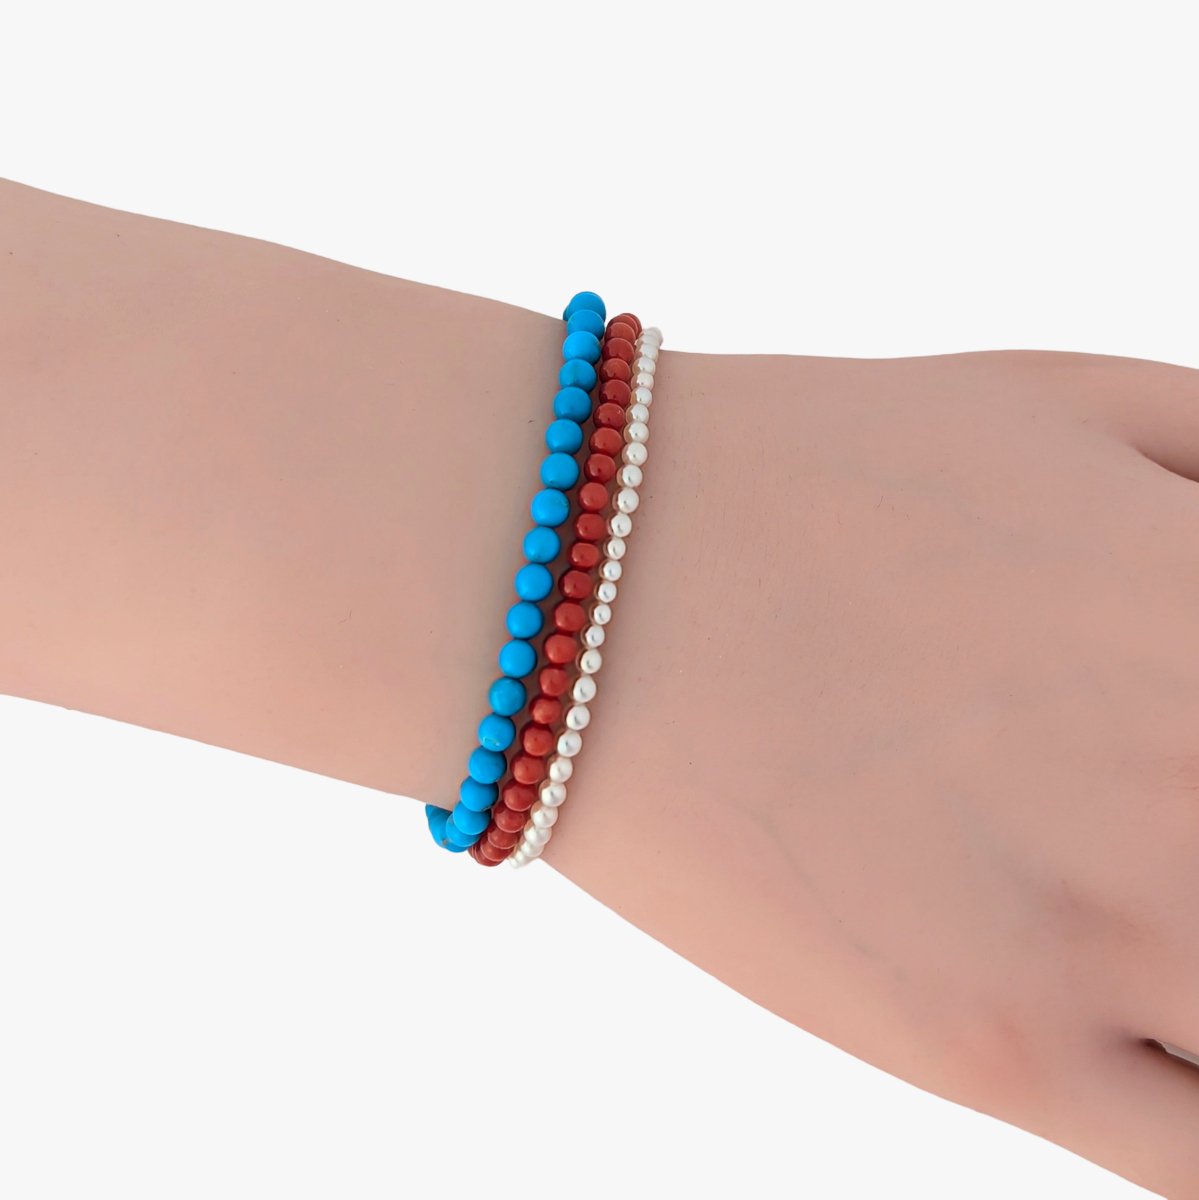 'Red, White, and Blue' Akoya Pearl, Coral, and Turquoise Three Tier Bracelet - Marina Korneev